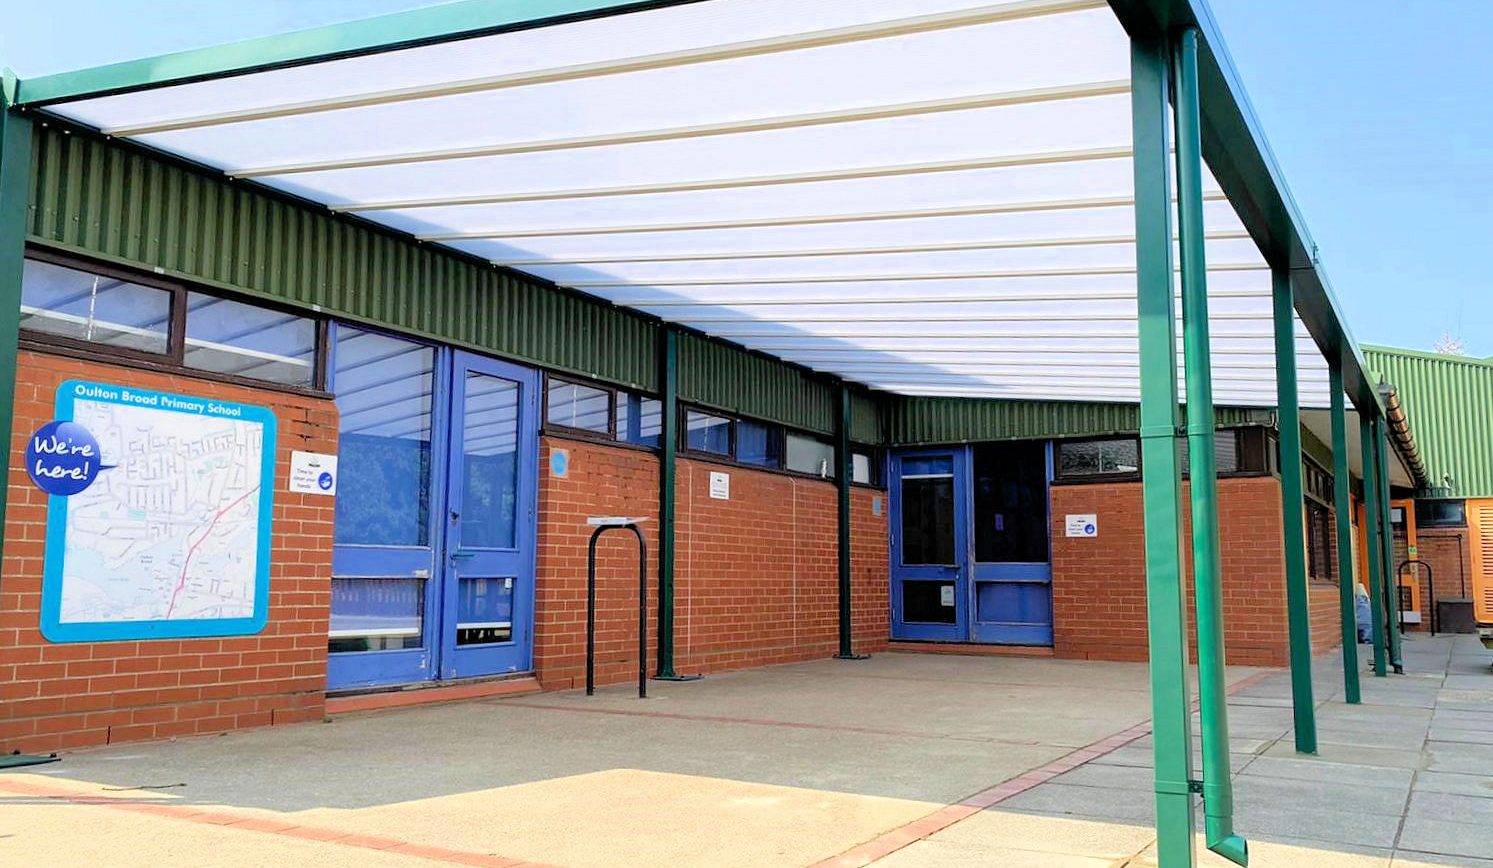 Oulton Broad Primary School – Free Standing Canopy